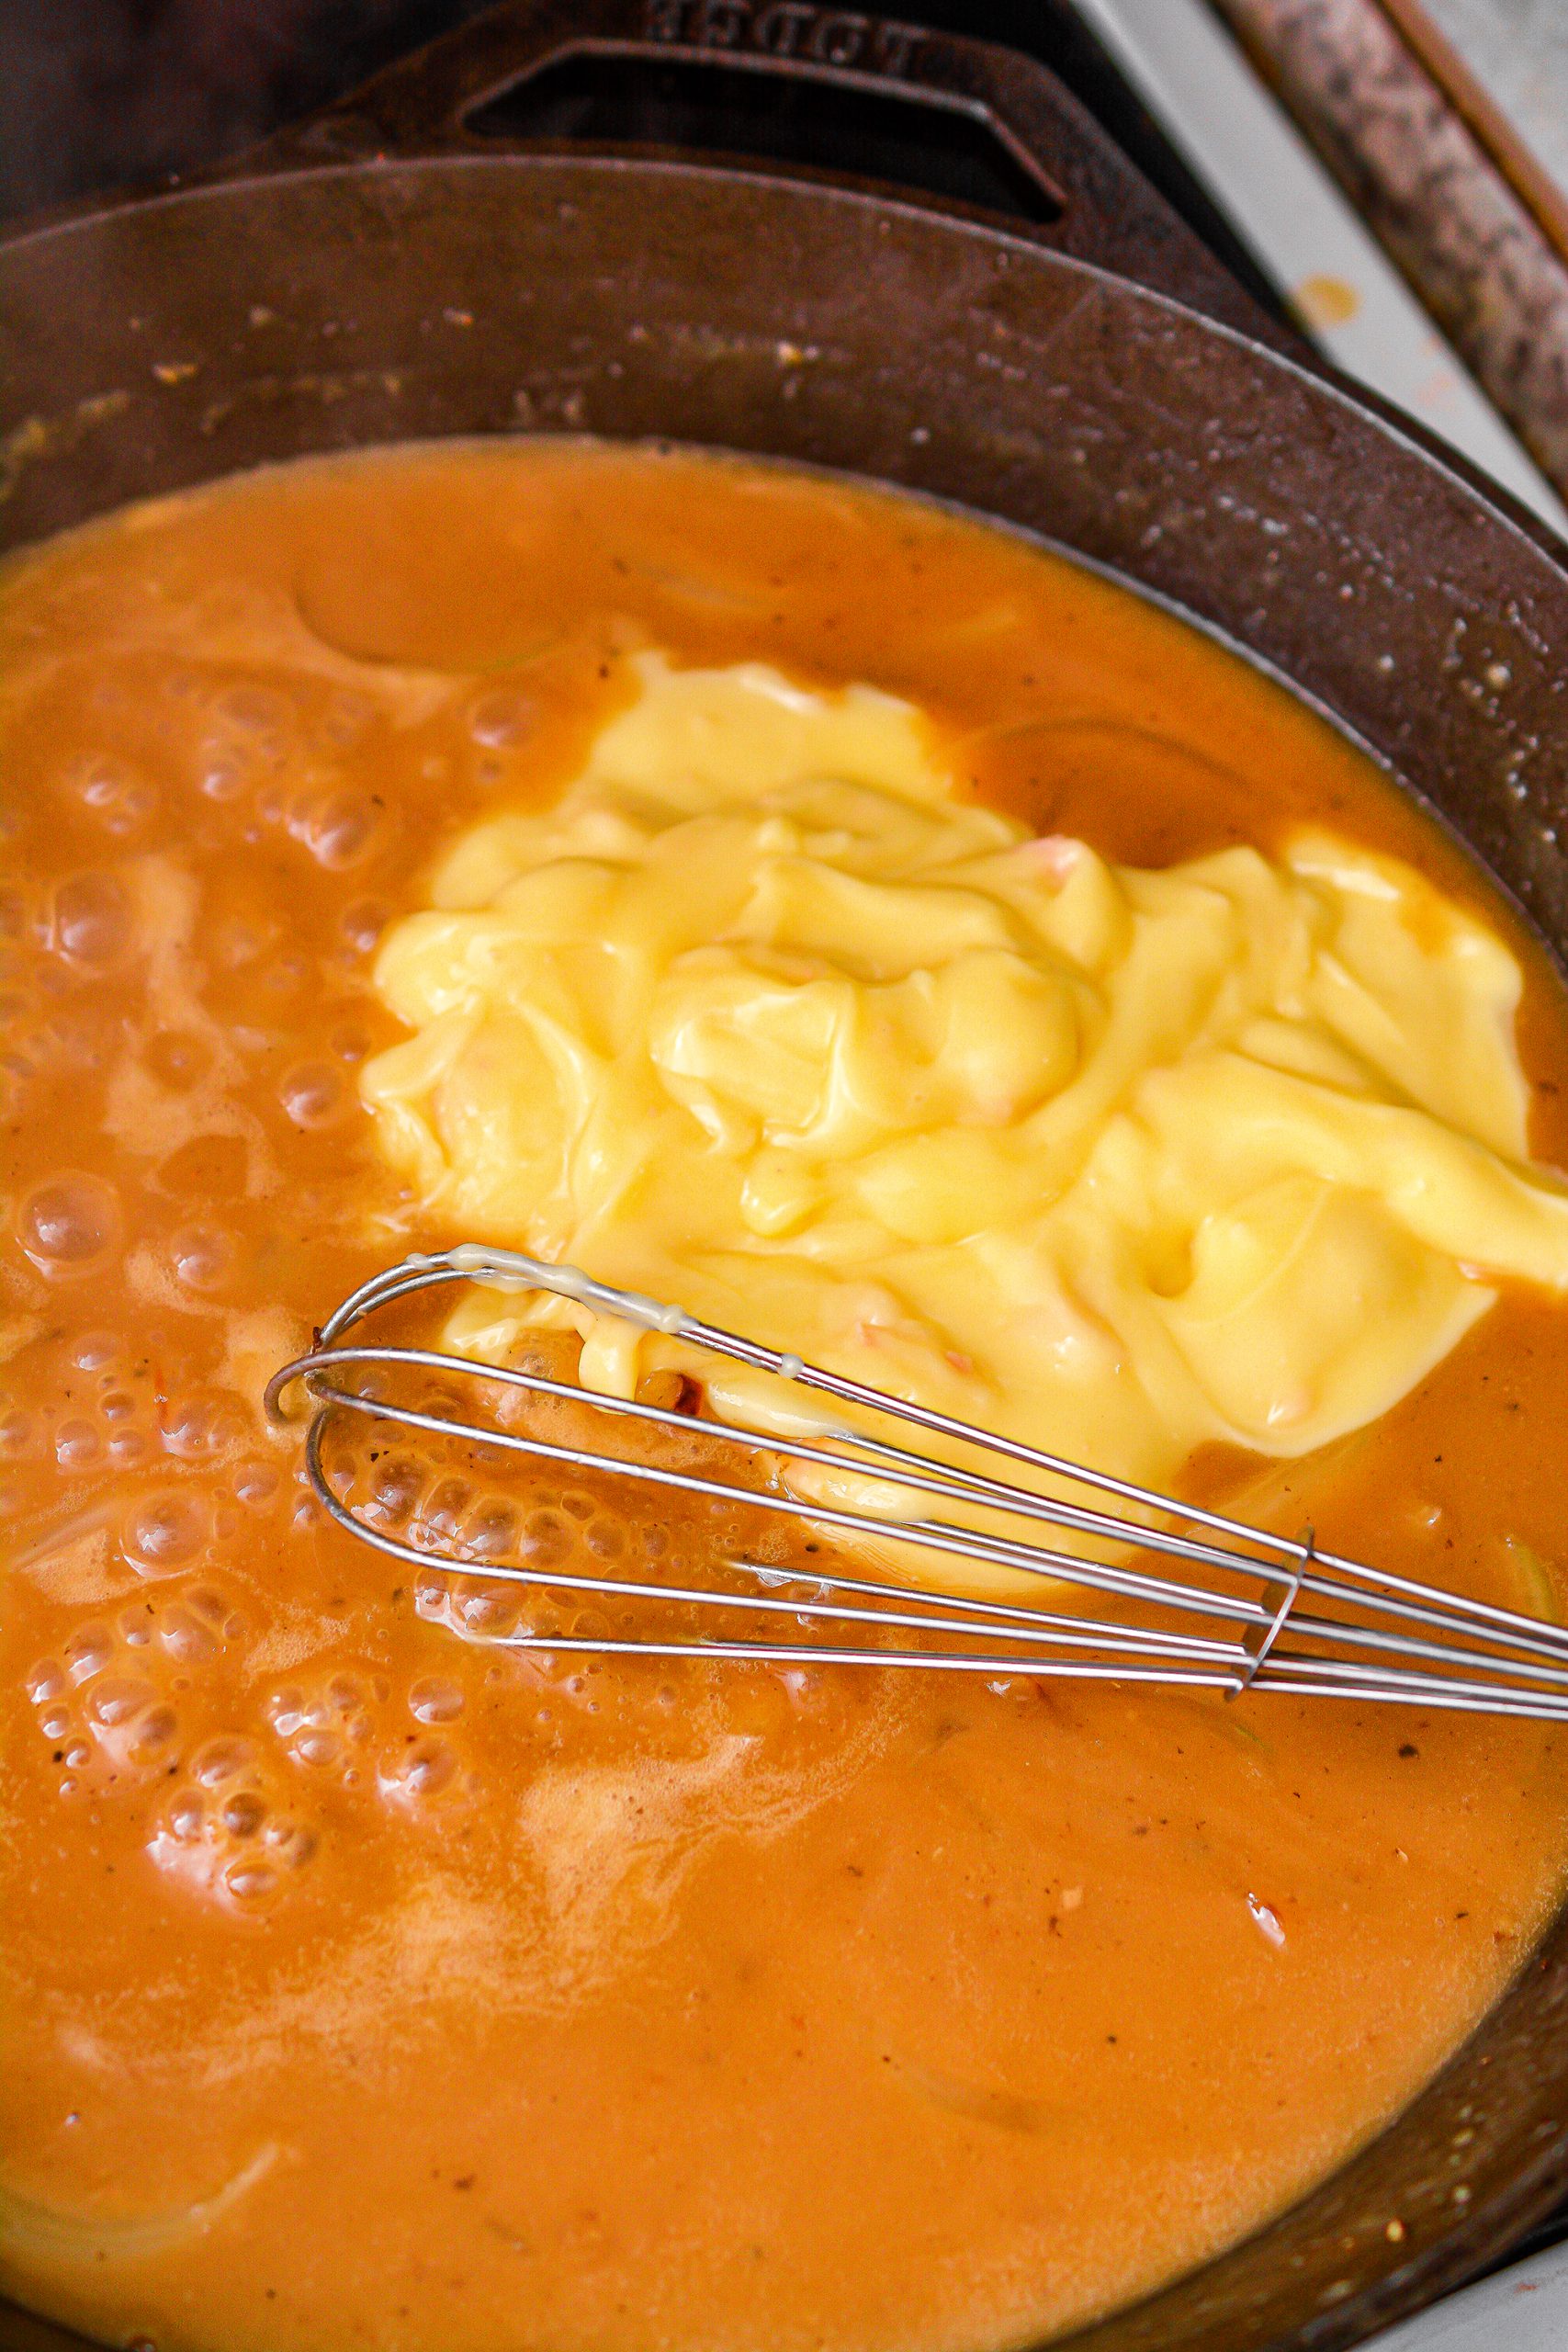 Pour the soup into the skillet, and whisk to combine.